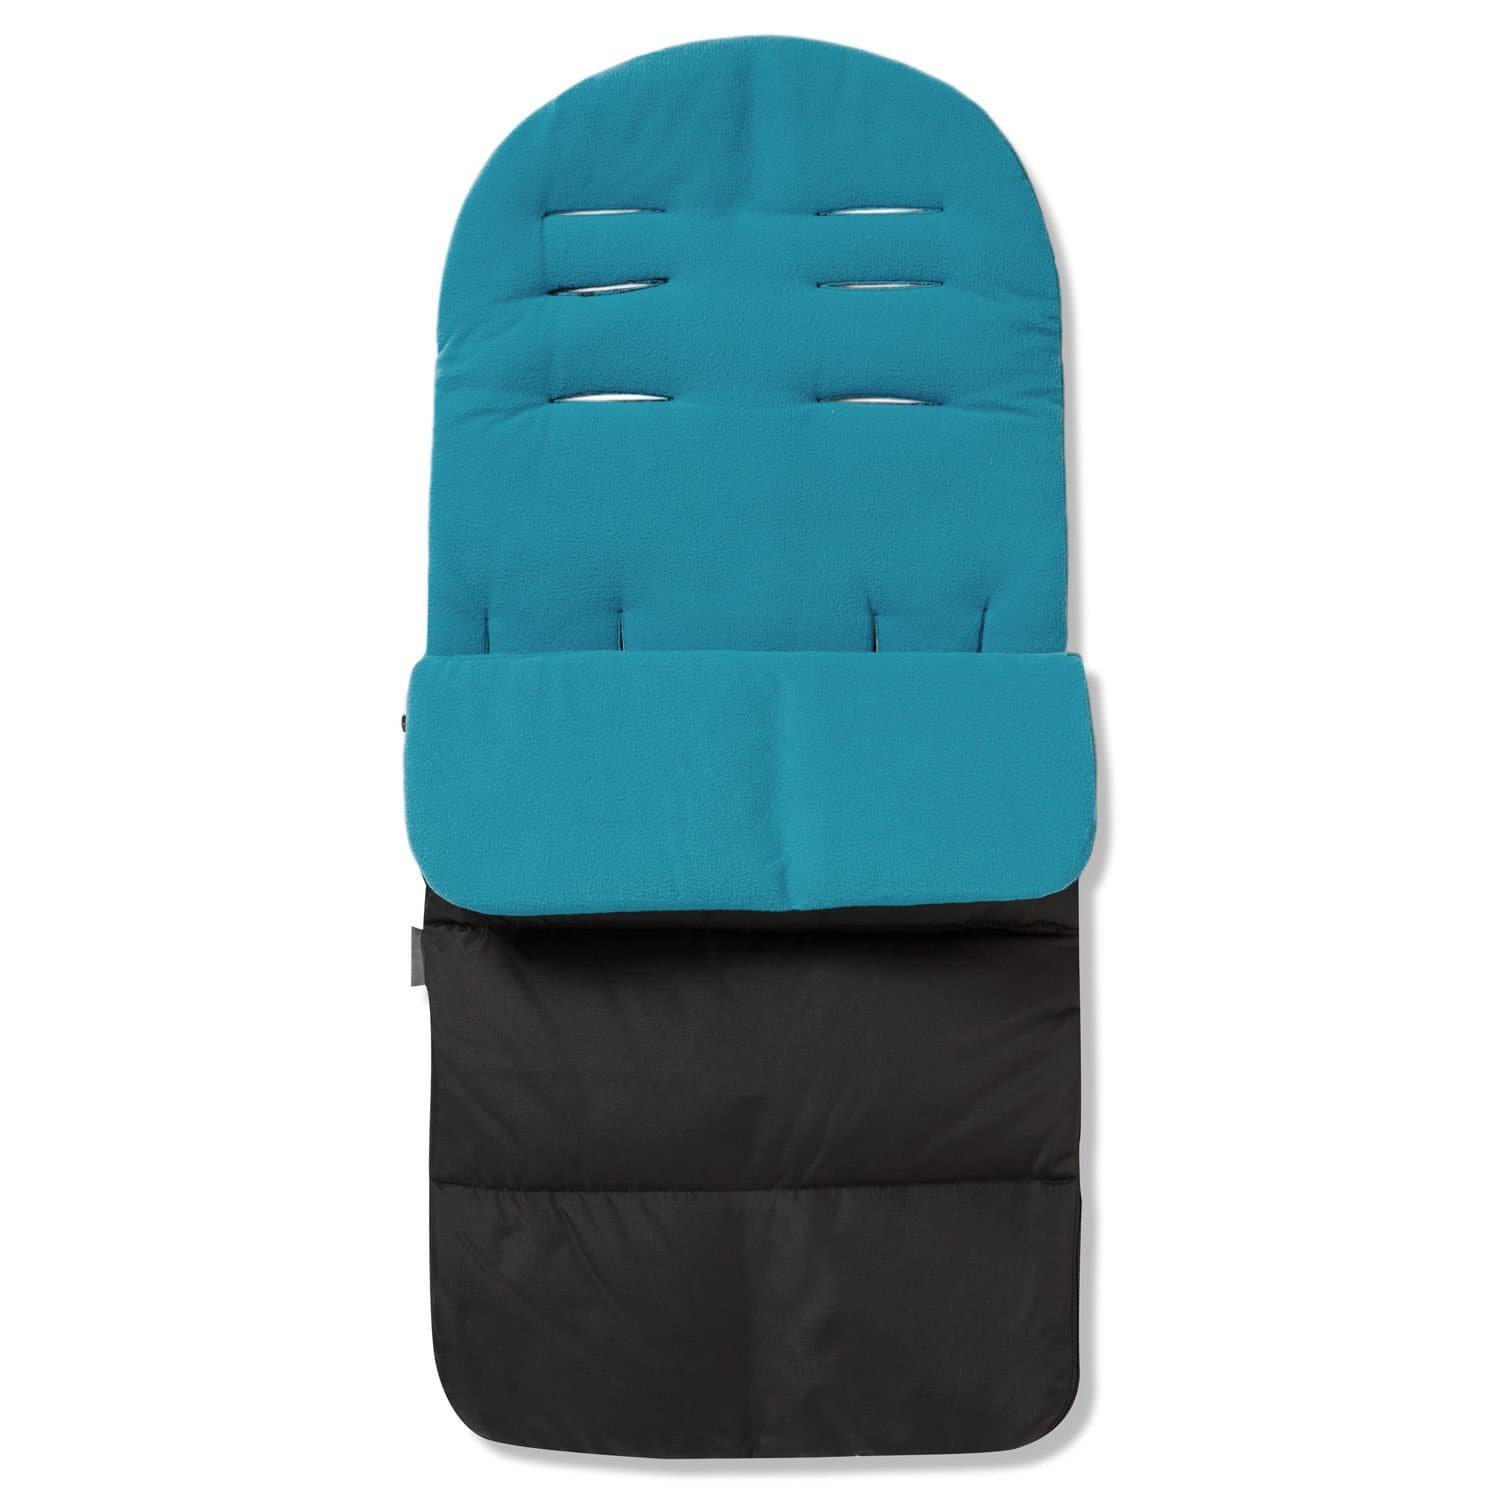 Premium Footmuff / Cosy Toes Compatible with Mamas & Papas - Ocean Blue / Fits All Models | For Your Little One